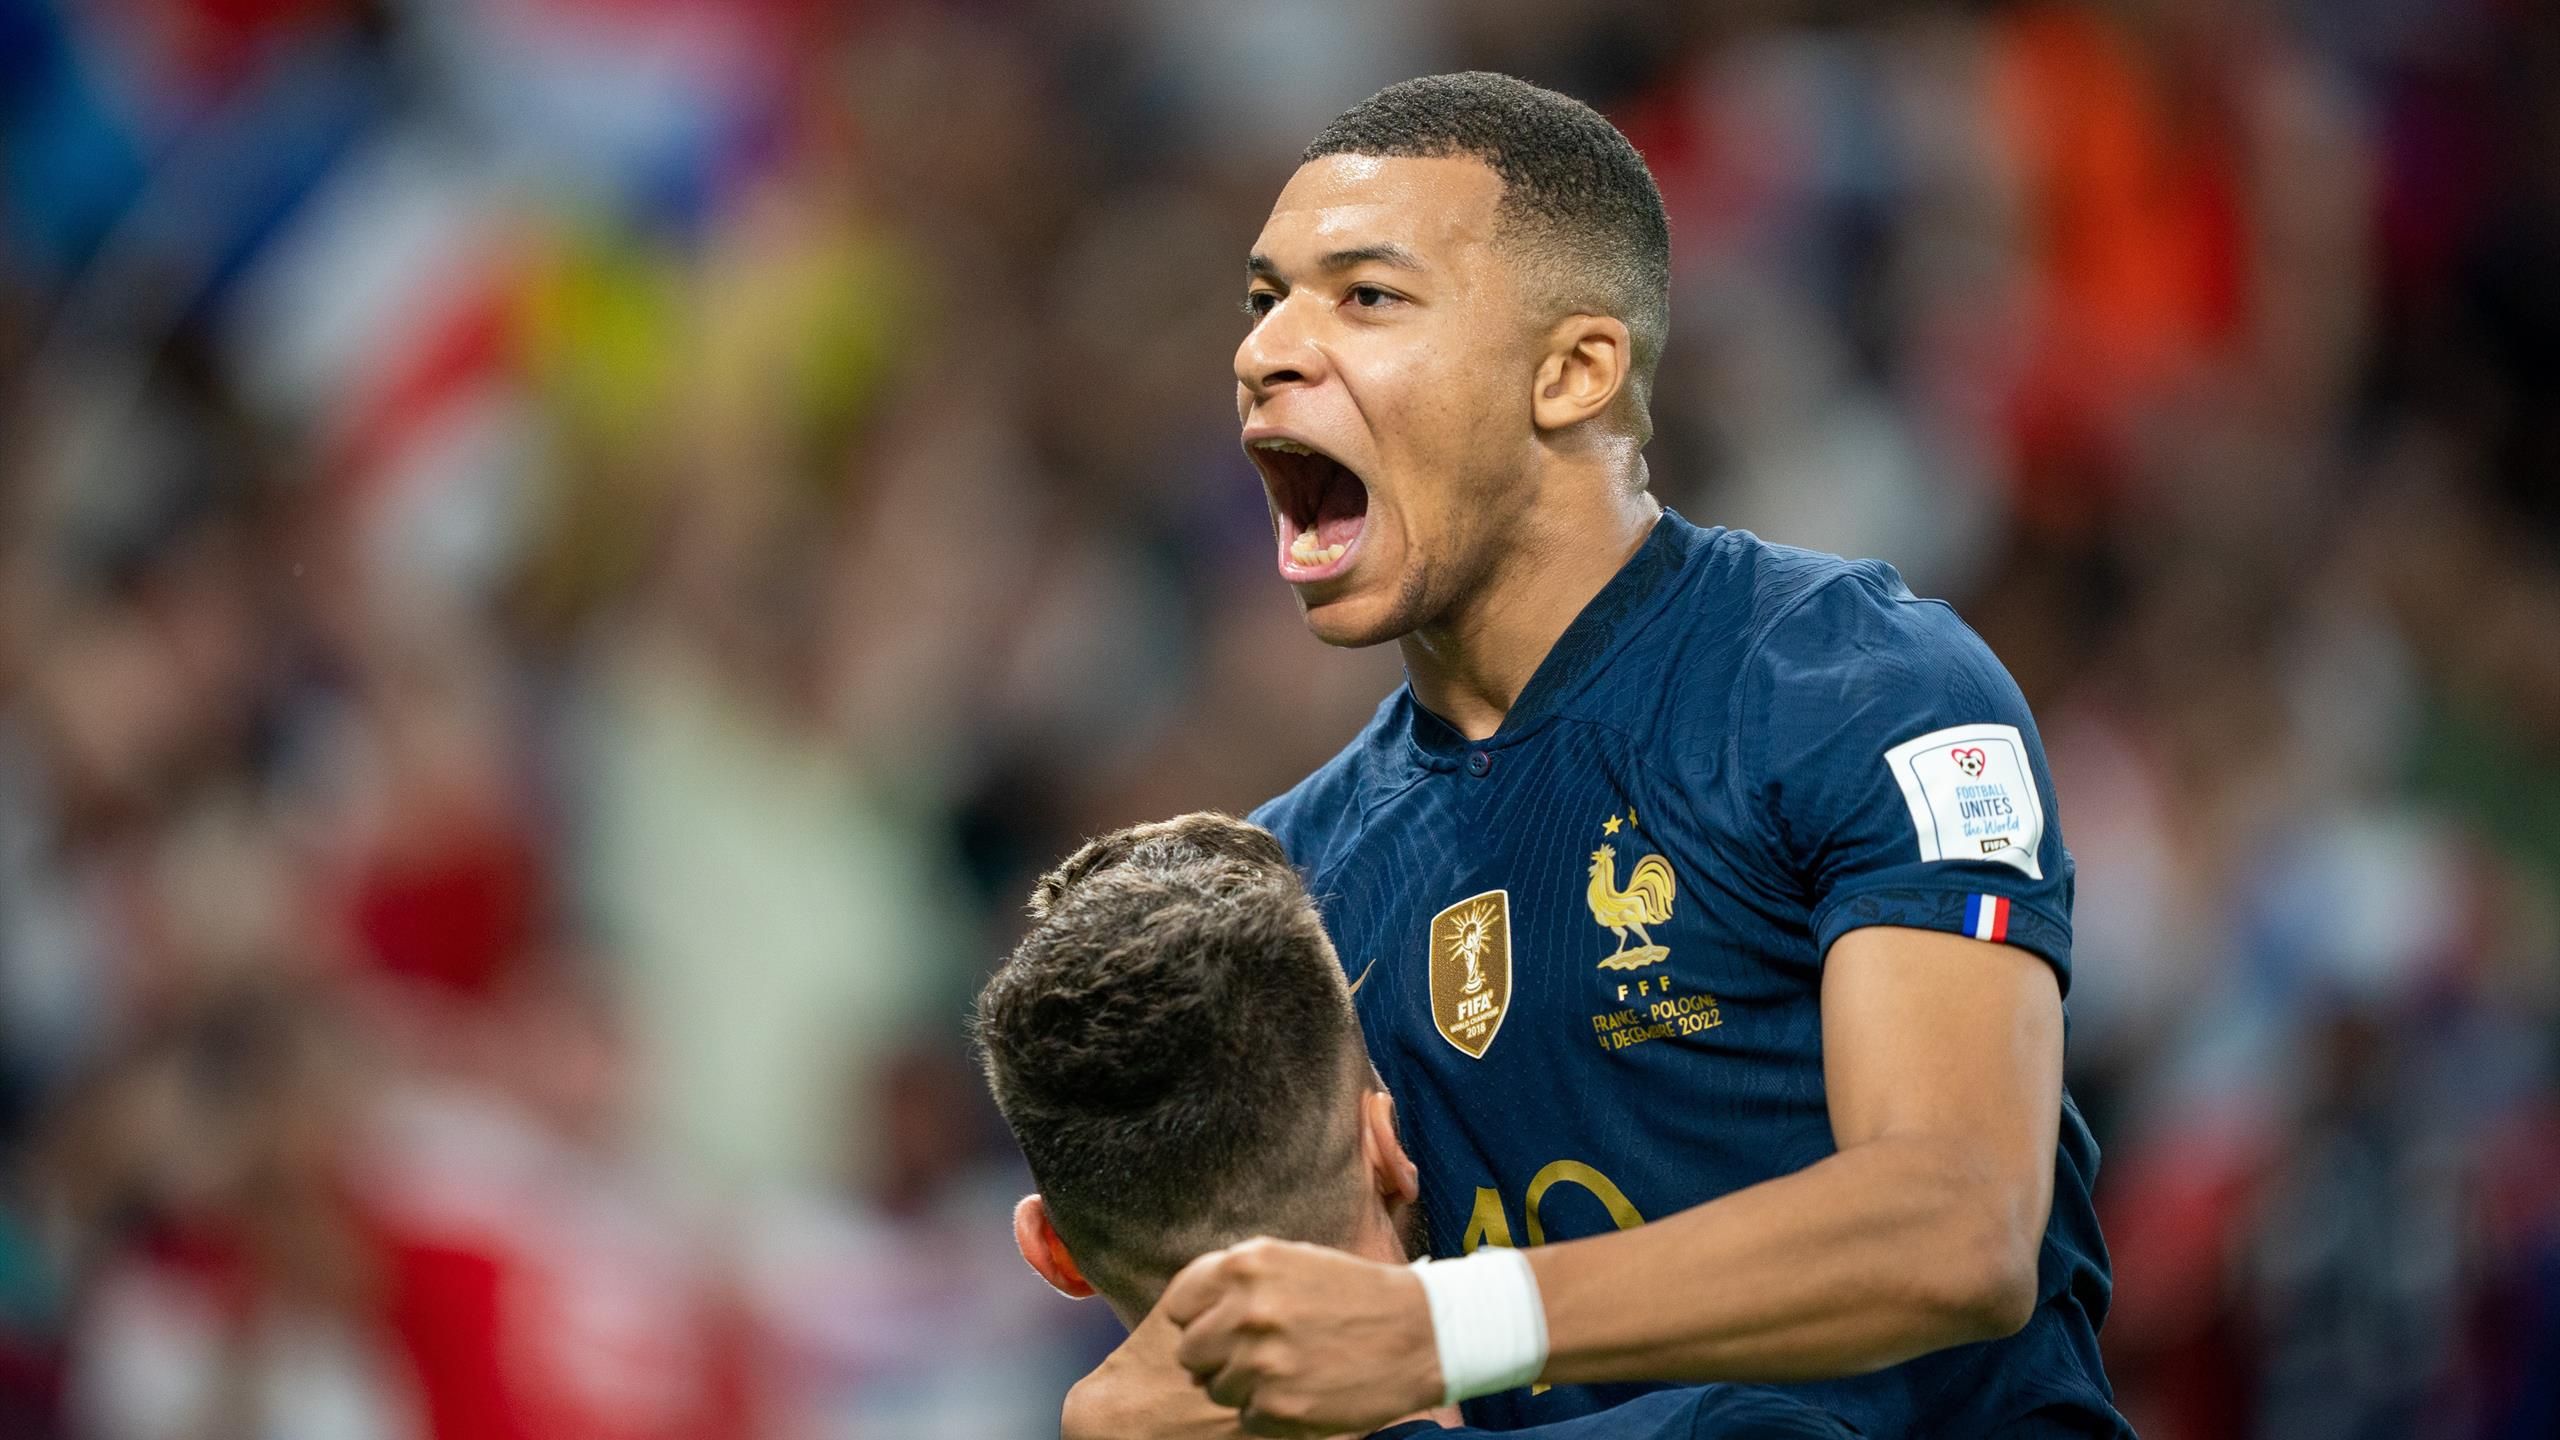 Kylian Mbappe: Global face of his race at FIFA World Cup 2022